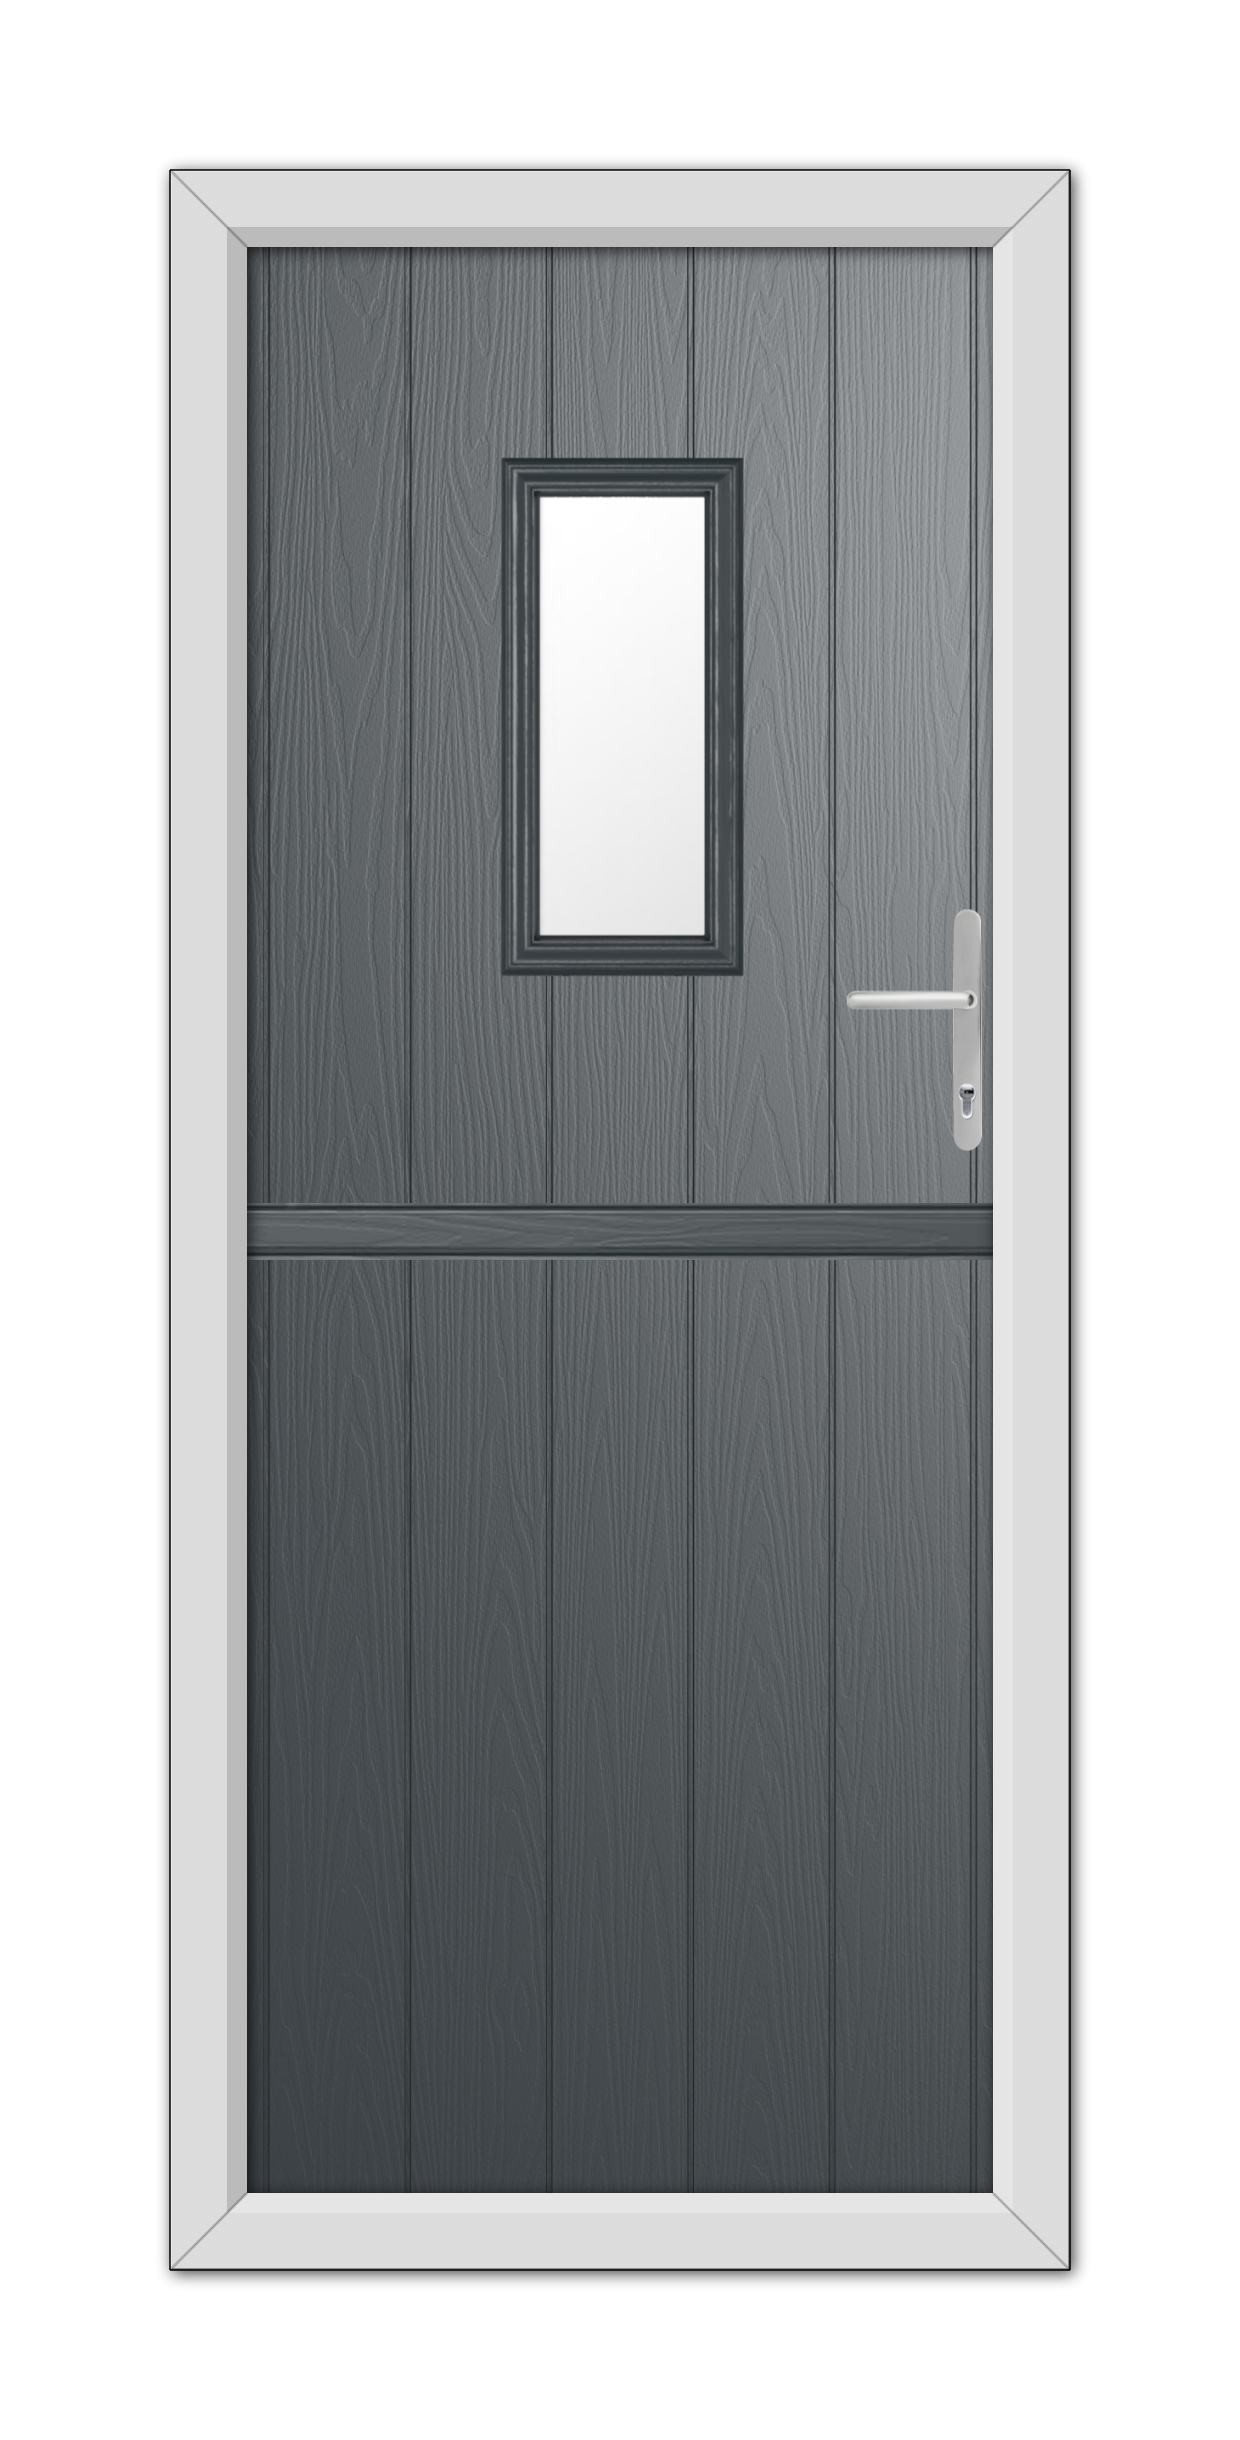 A modern Anthracite Grey Somerset Stable Composite Door 48mm Timber Core with a small square window and a metallic handle, set within a white frame.